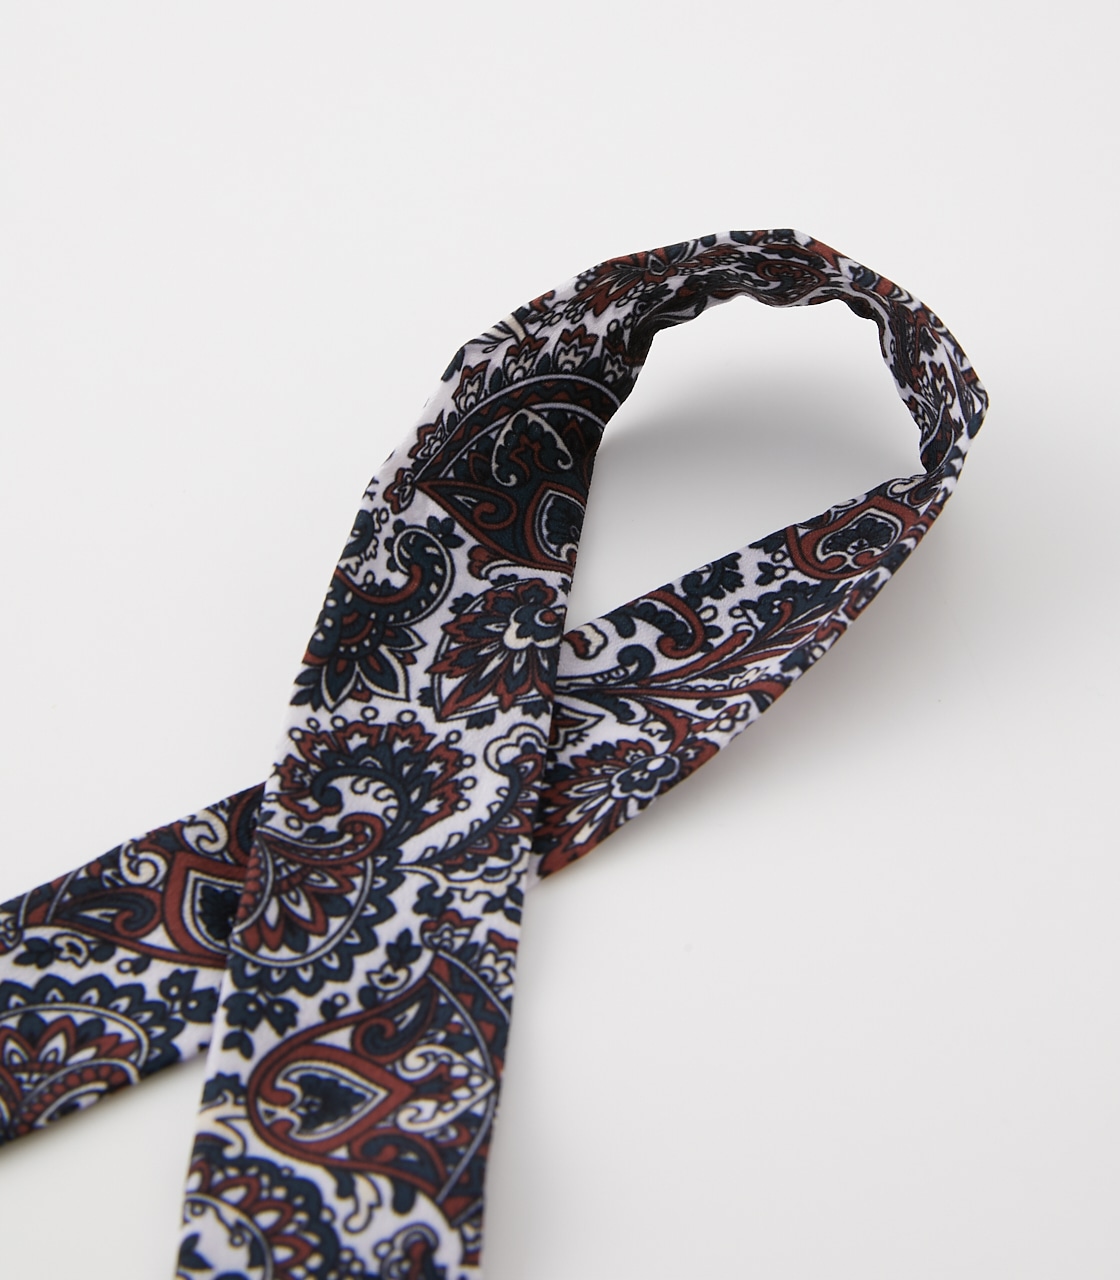 FLOWER PAISLEY SCARF NECKLACE/フラワーペイズリースカーフネックレス 詳細画像 柄NVY 3